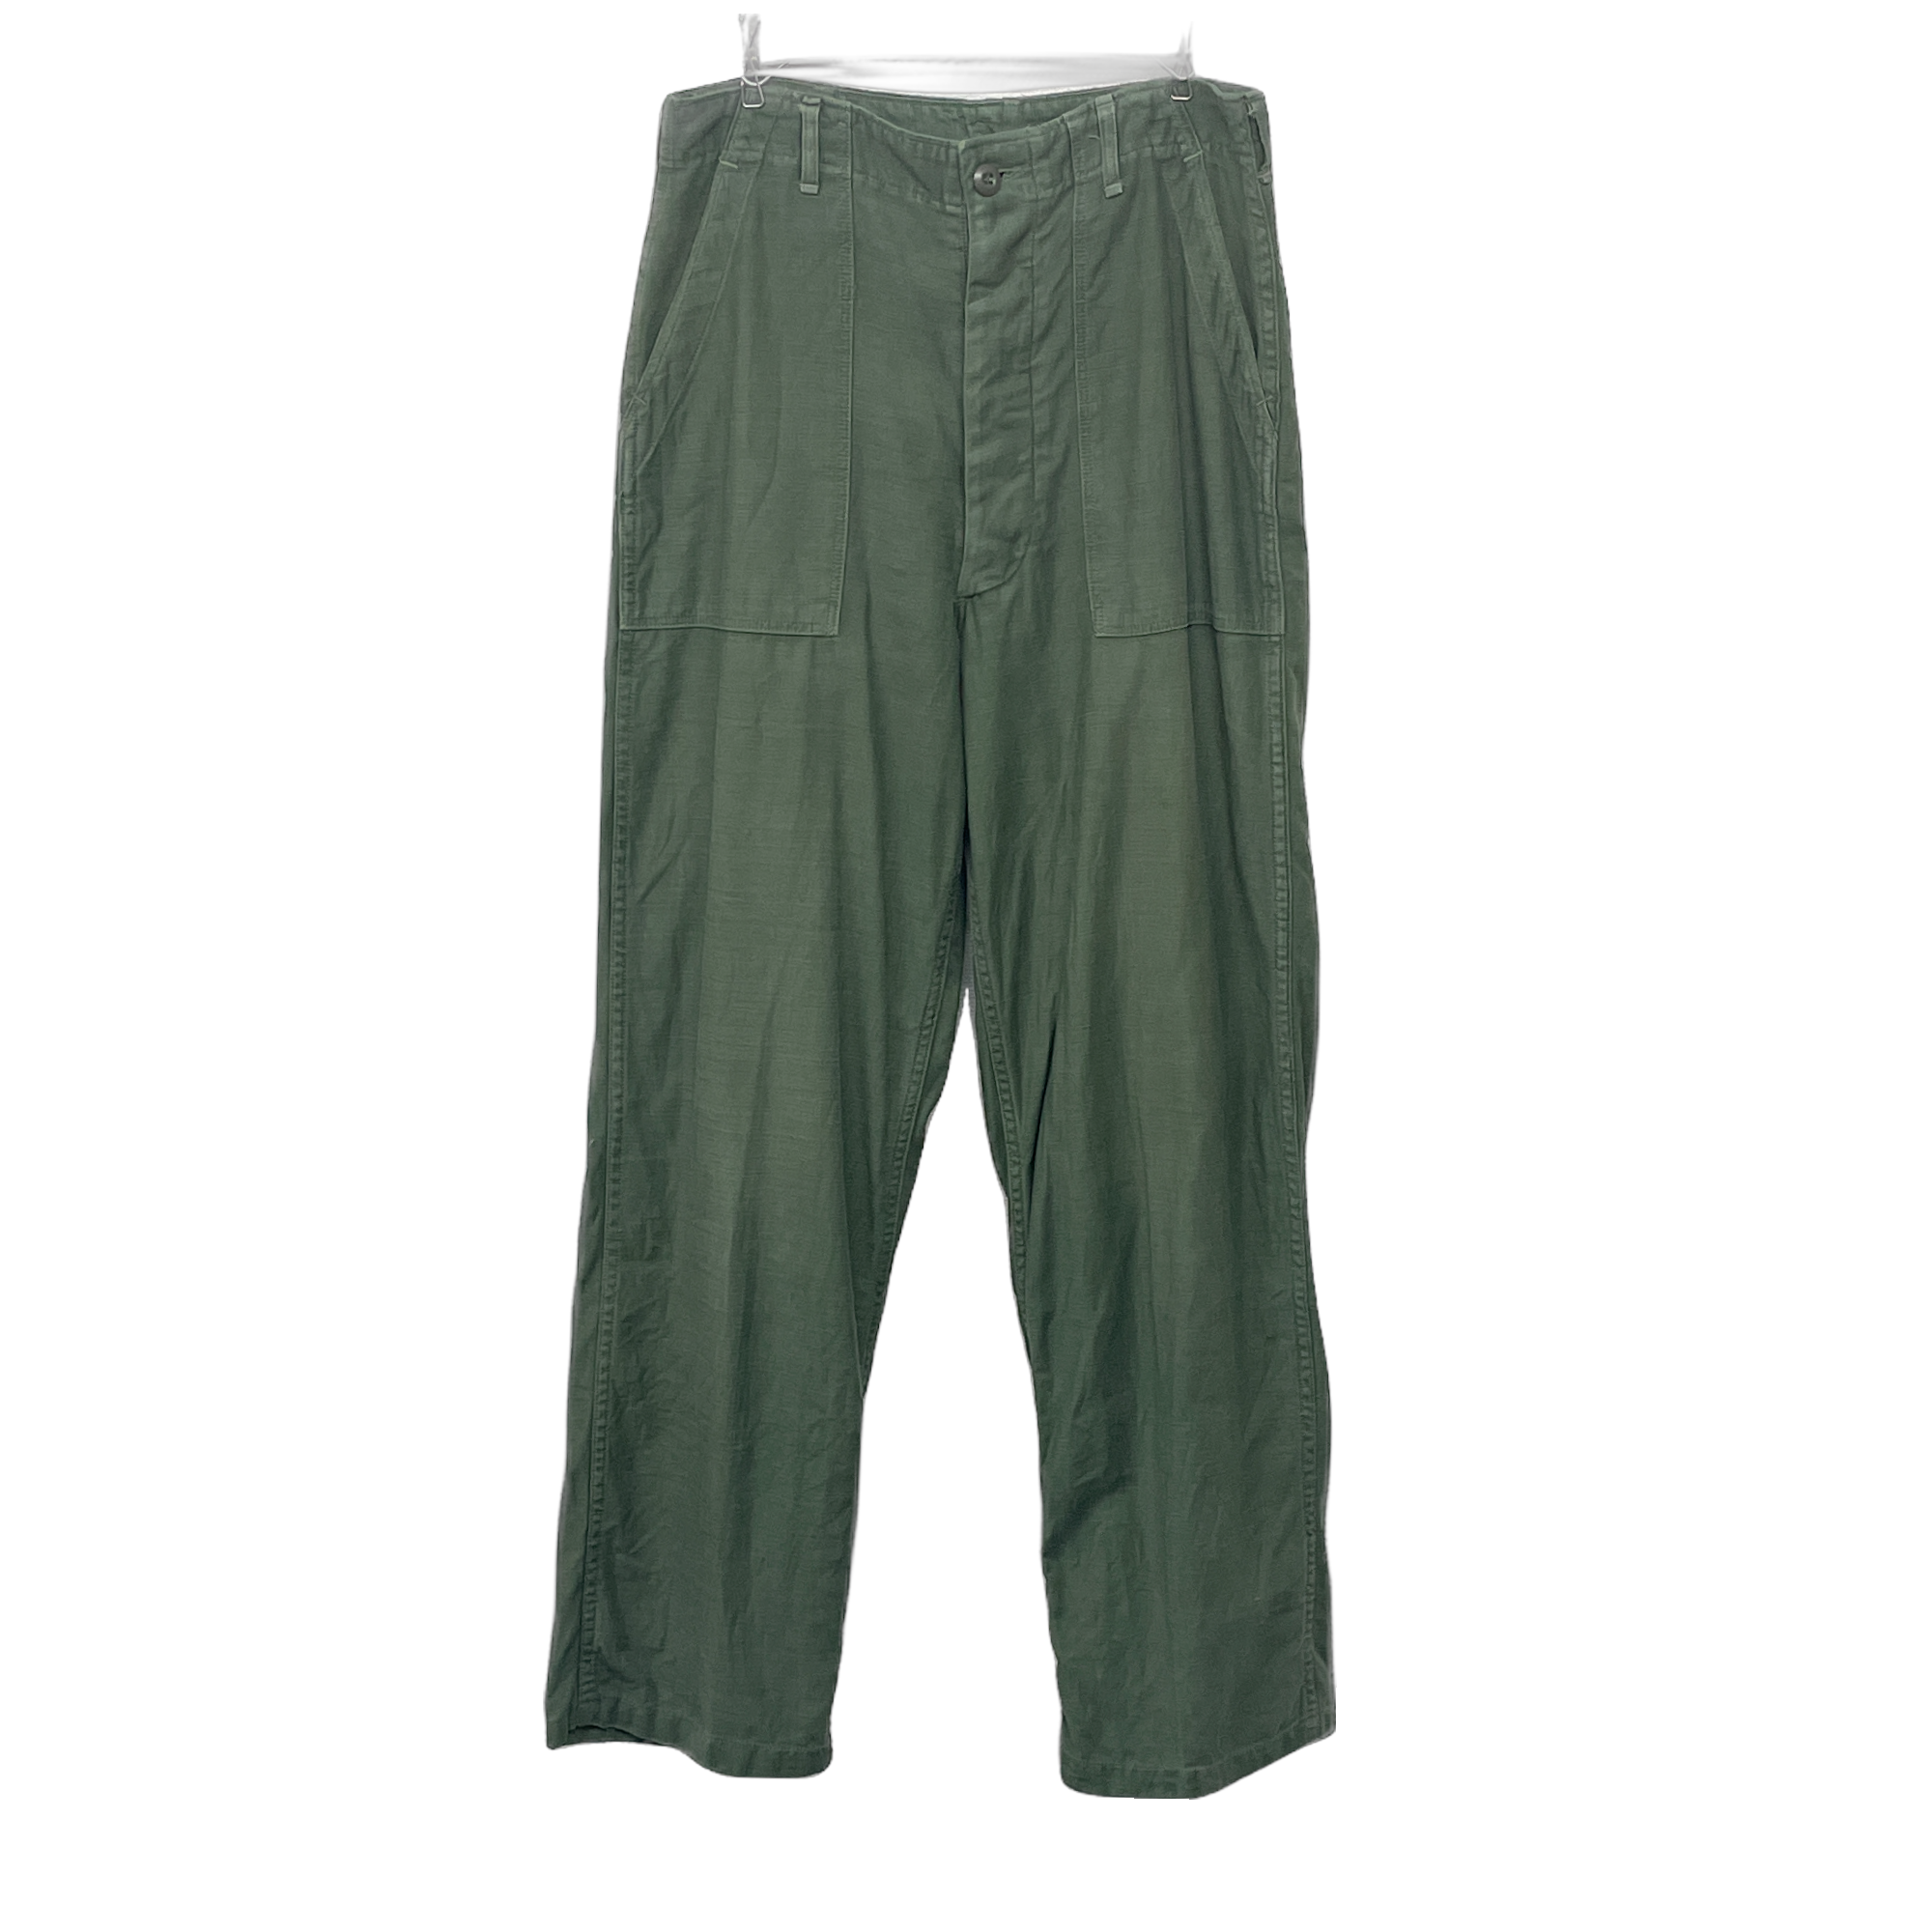 's 米軍 us army trousers  ベイカーパンツ